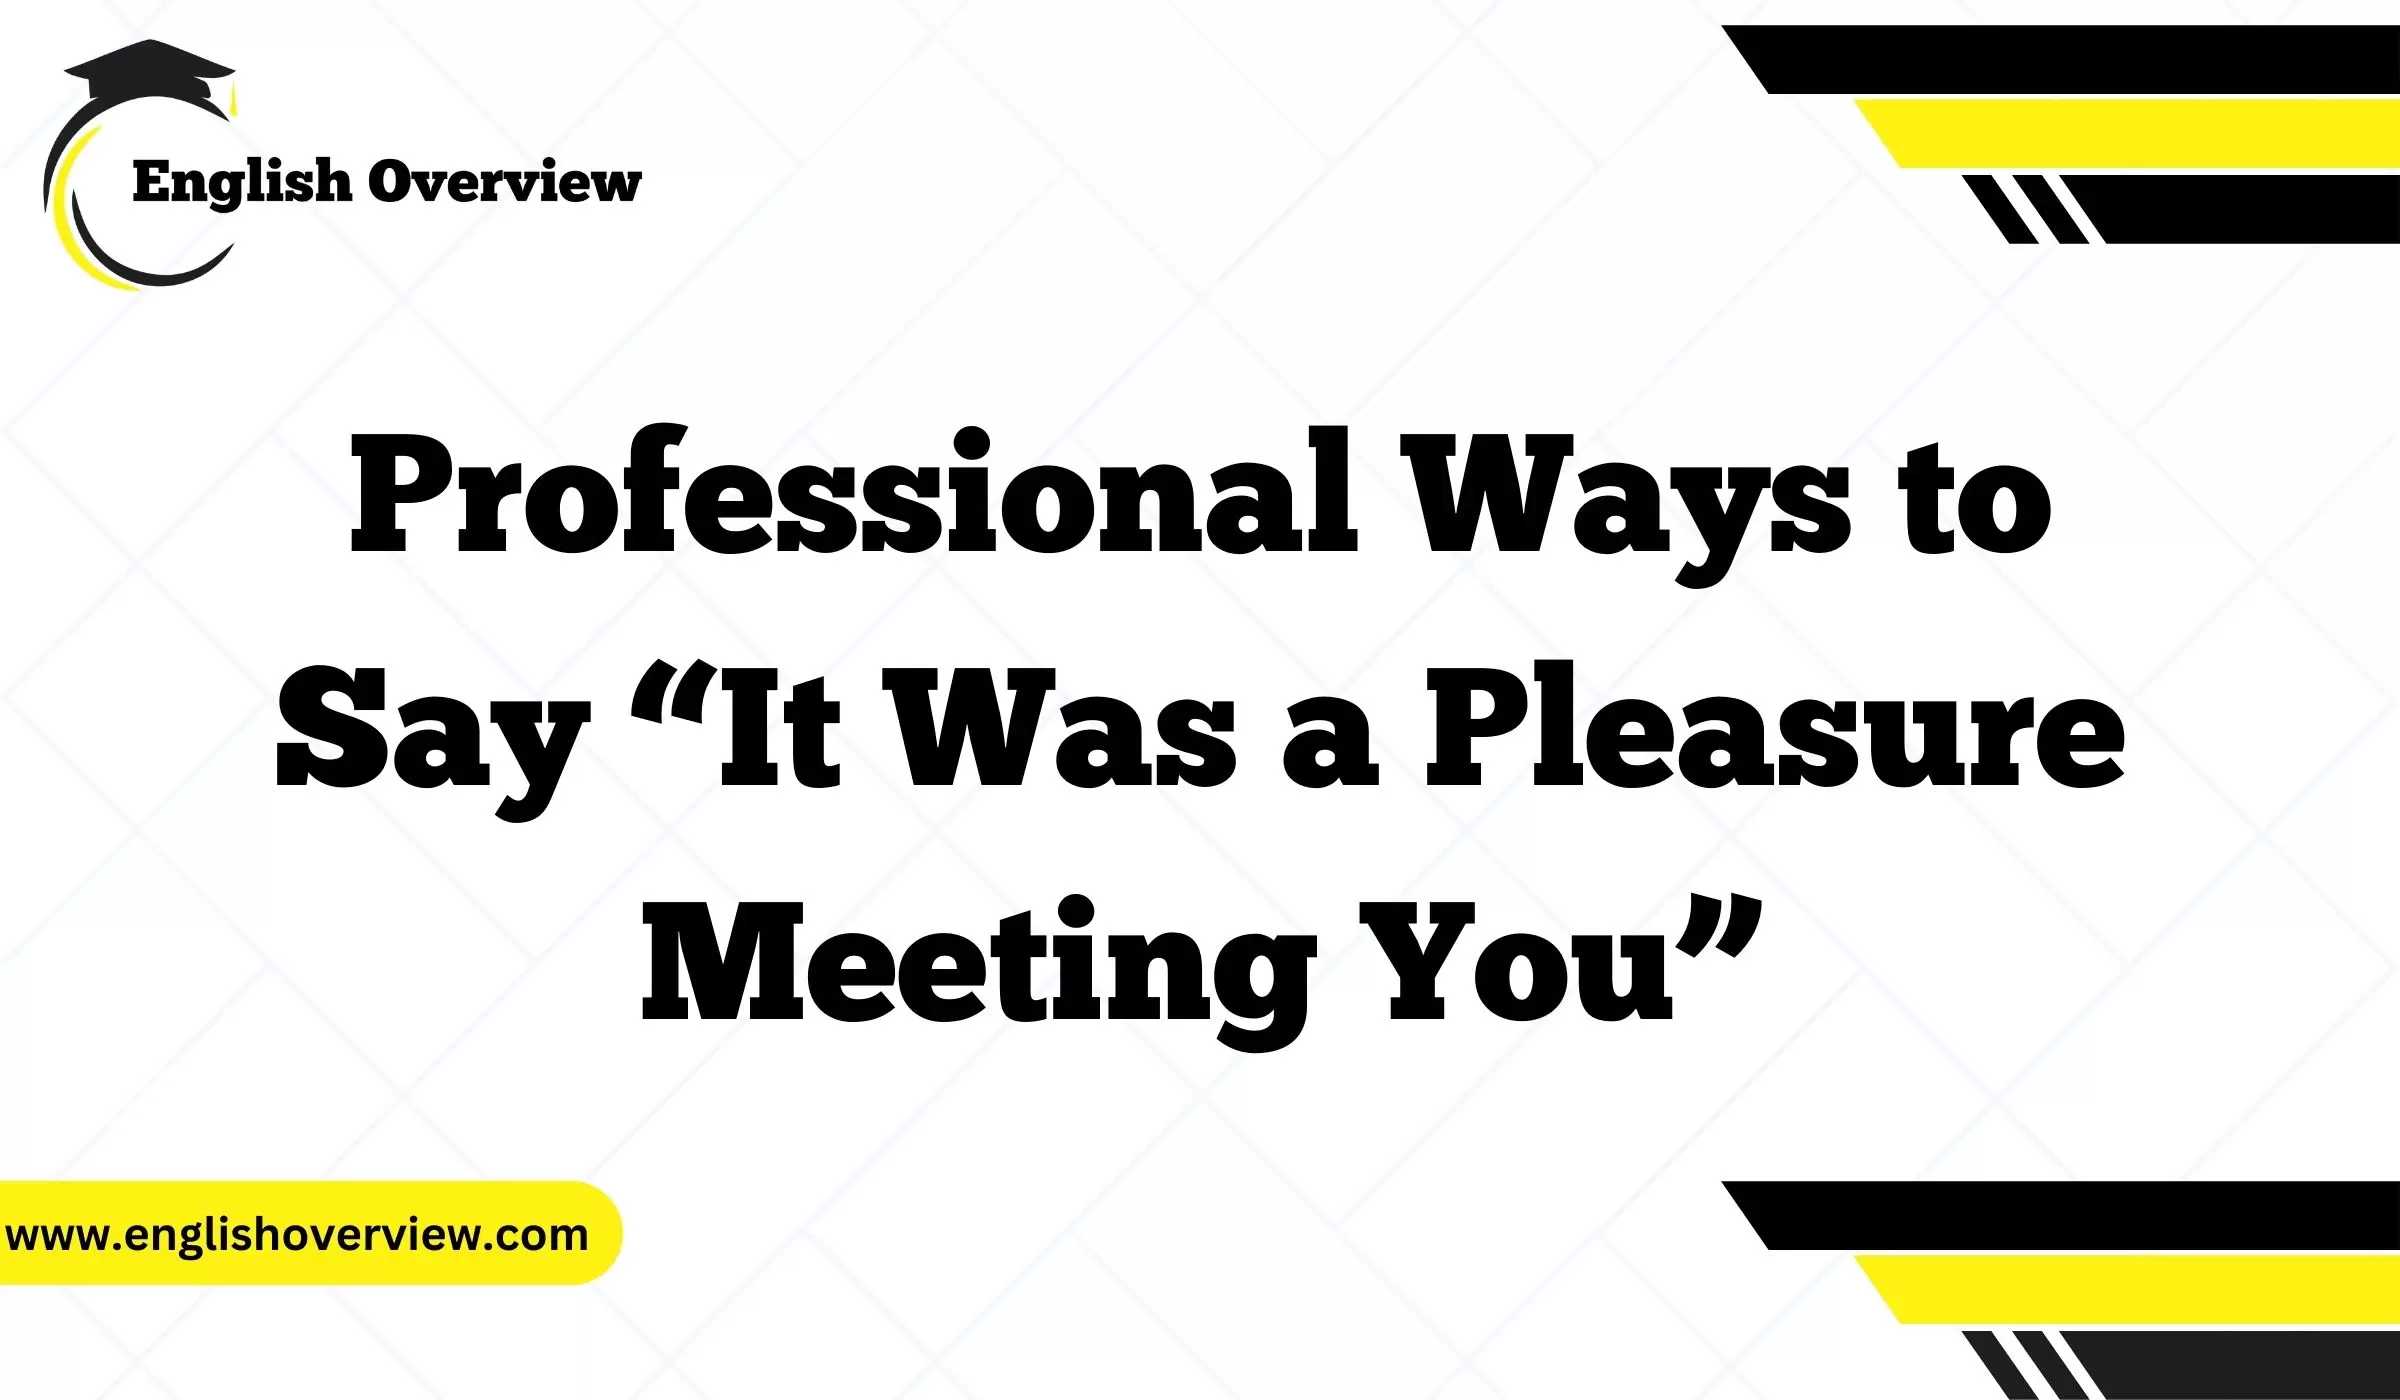 Professional Ways to Say “It Was a Pleasure Meeting You”